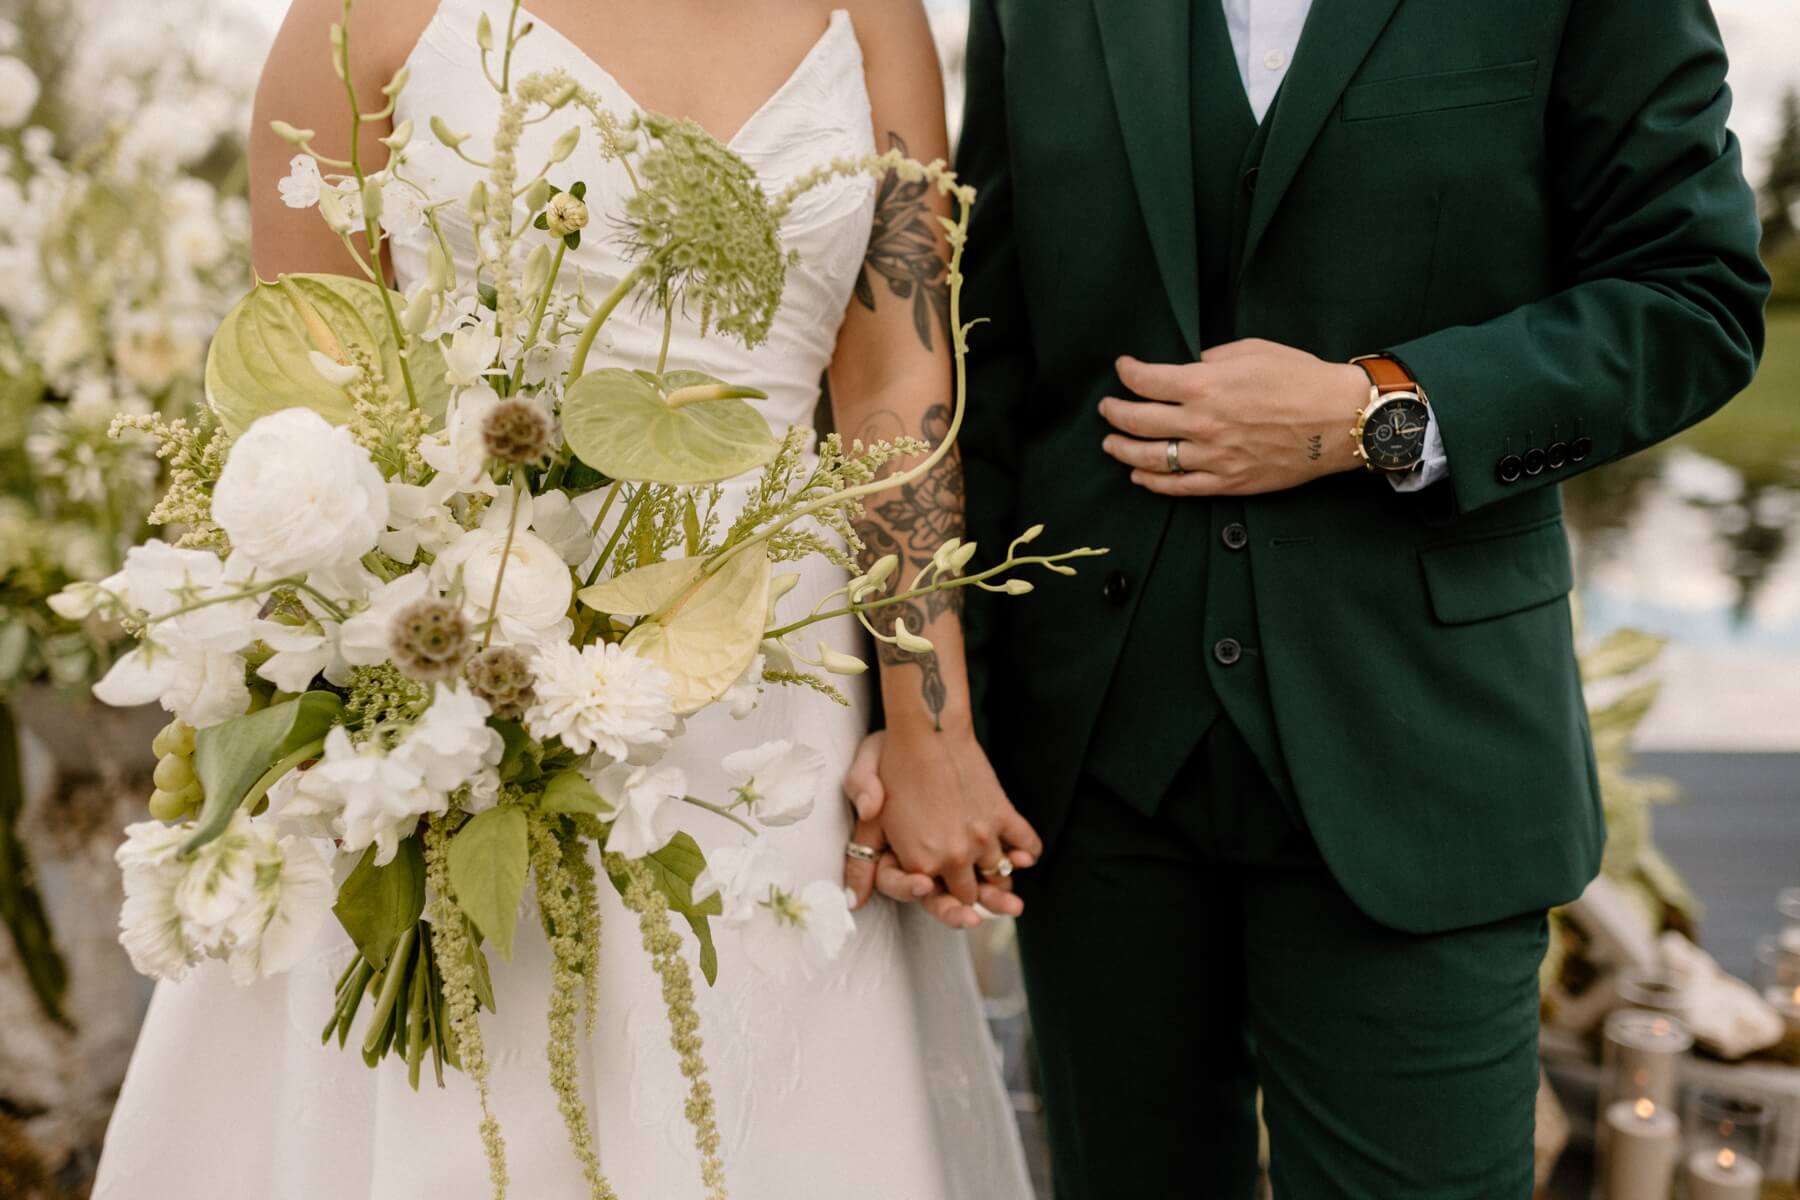 Partner's holding hands with green and white wedding bouquet in front